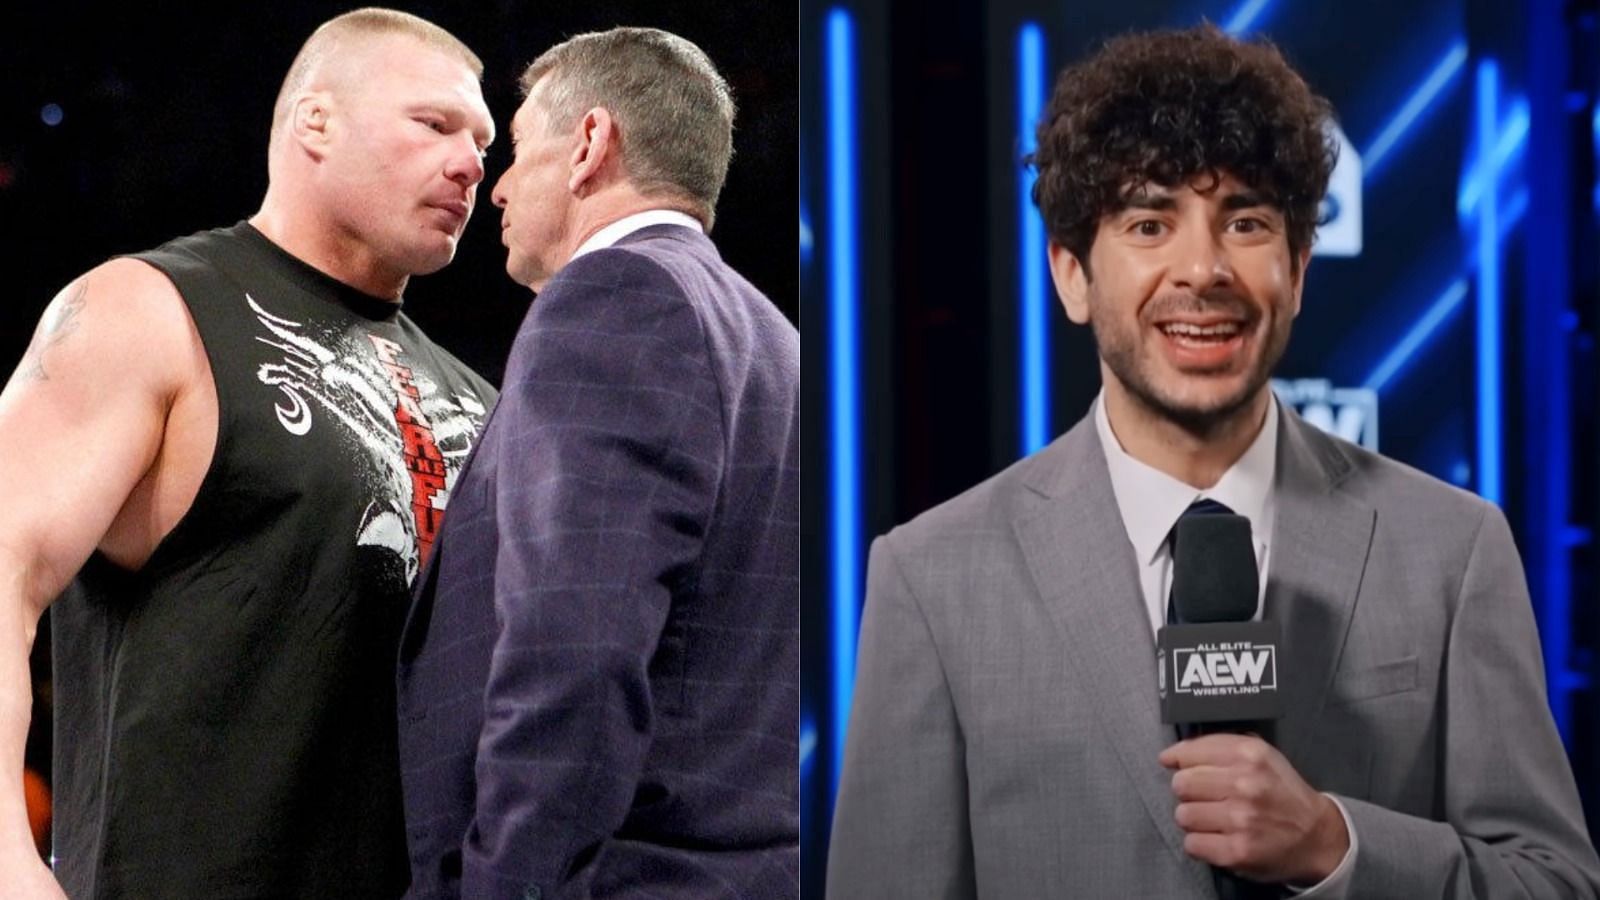 Will Brock Lesnar to WWE or join AEW? [Image courtesy: WWE website (left) and AEW YouTube (right)